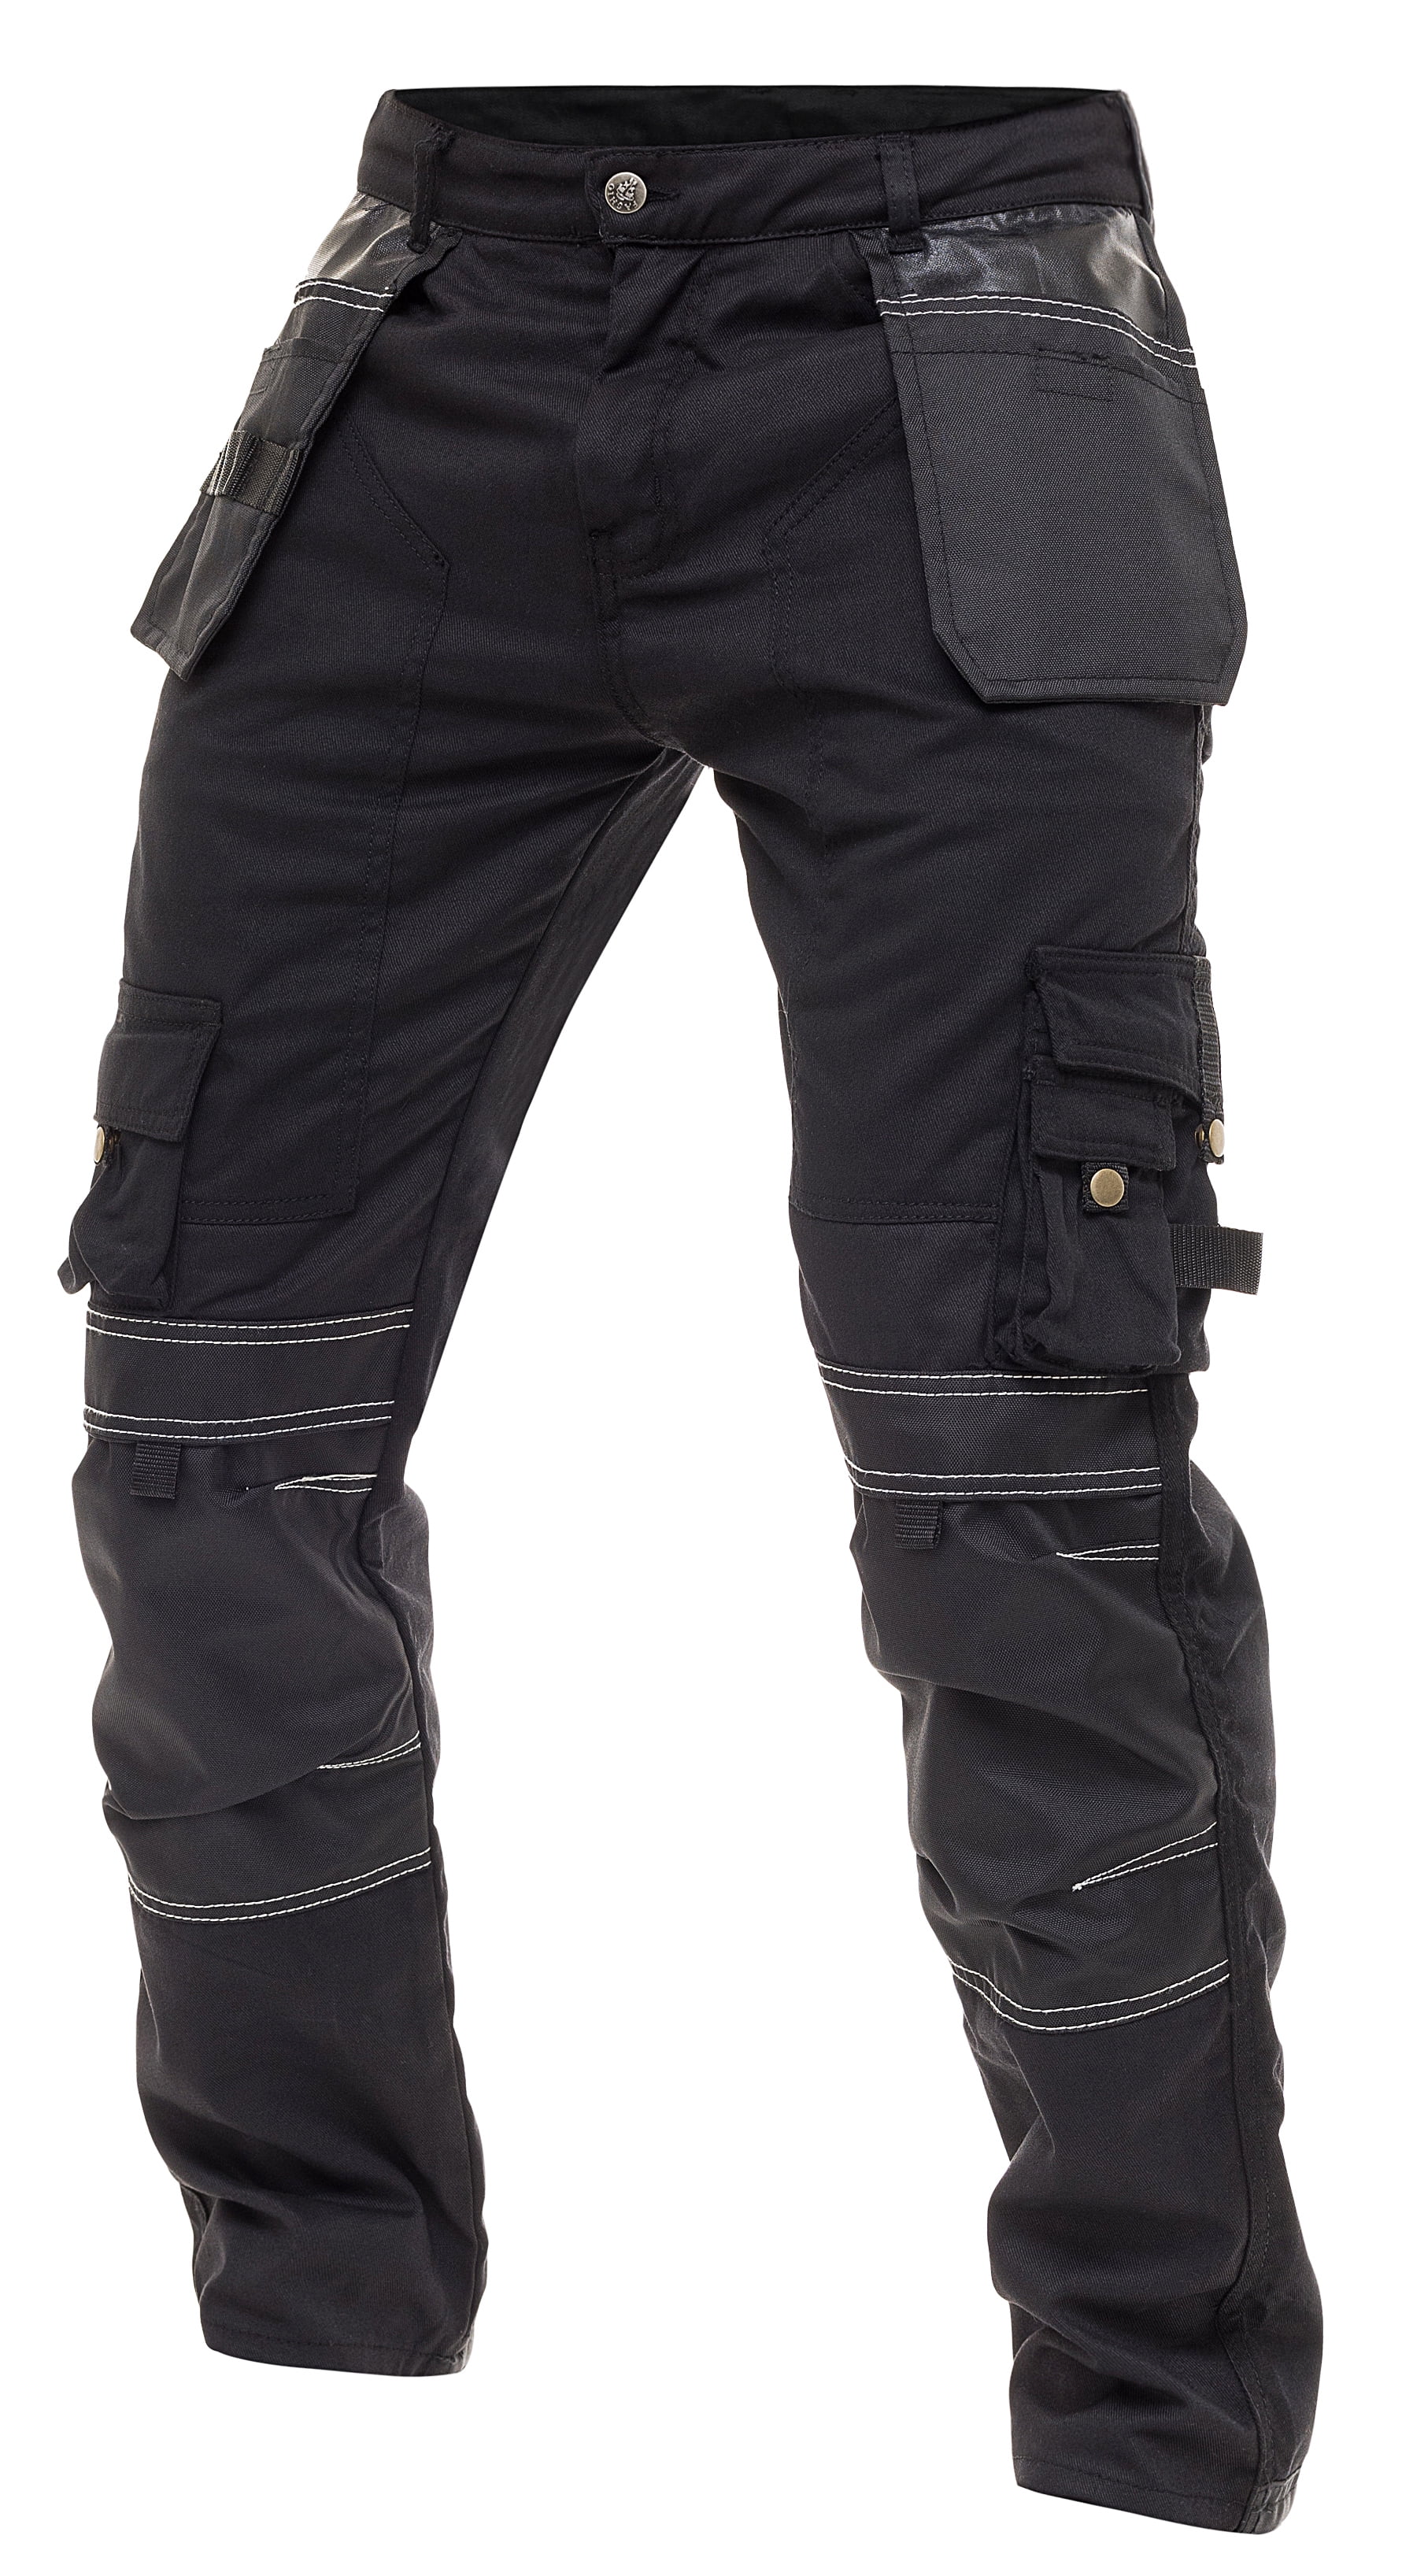 Top more than 91 workwear trousers with knee pads - in.cdgdbentre